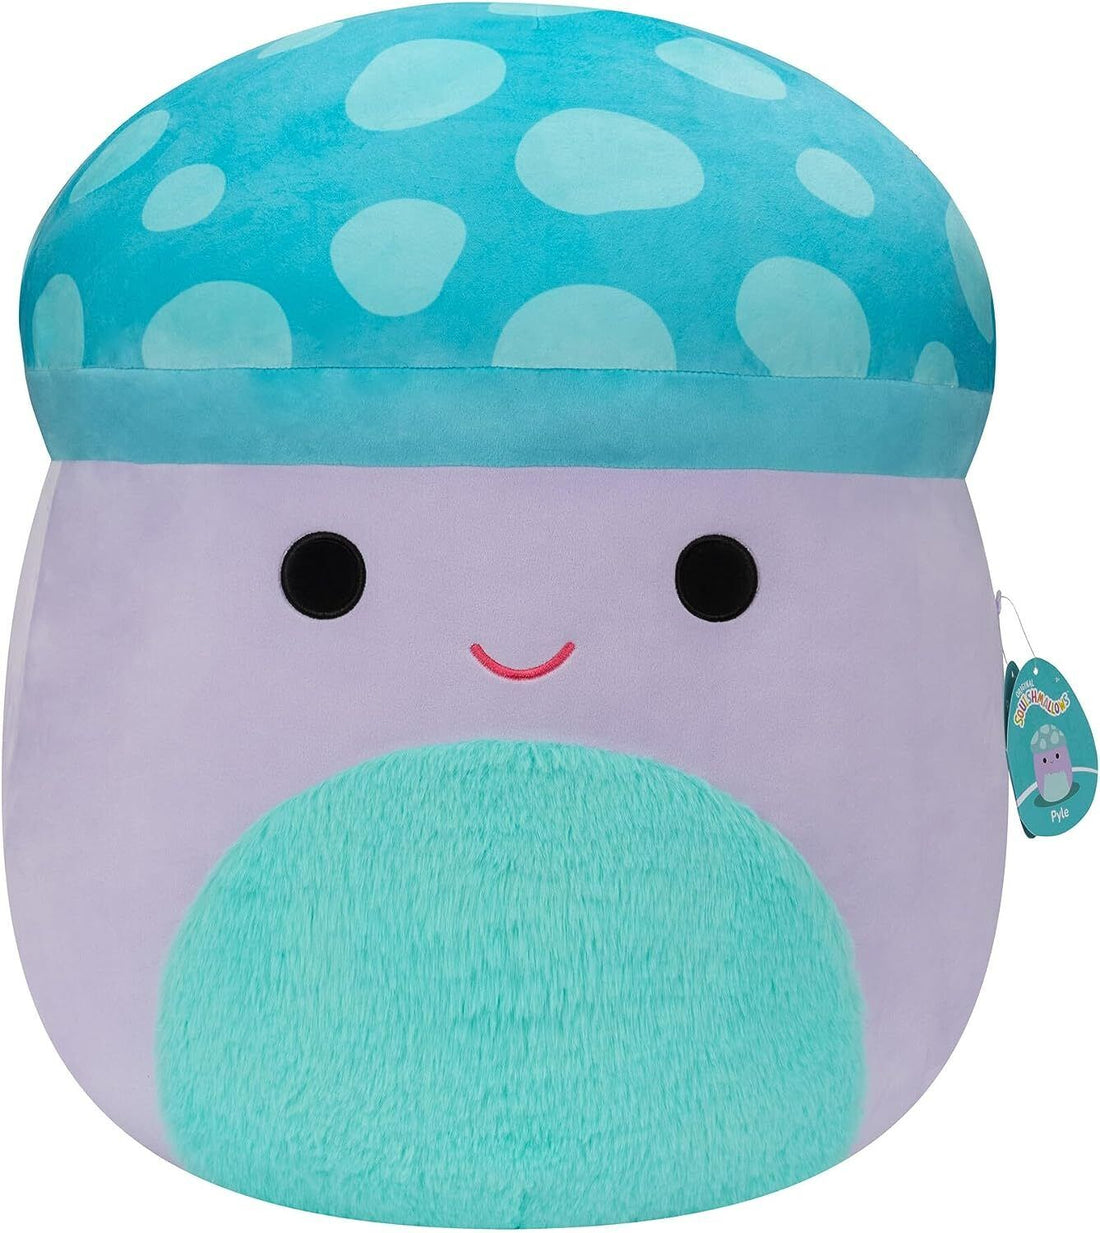 16-Inch Squishmallow Plush Toys - Various Characters-Super Soft and Collectible - PYLE BLUE AND PURPLE MUSHROOM